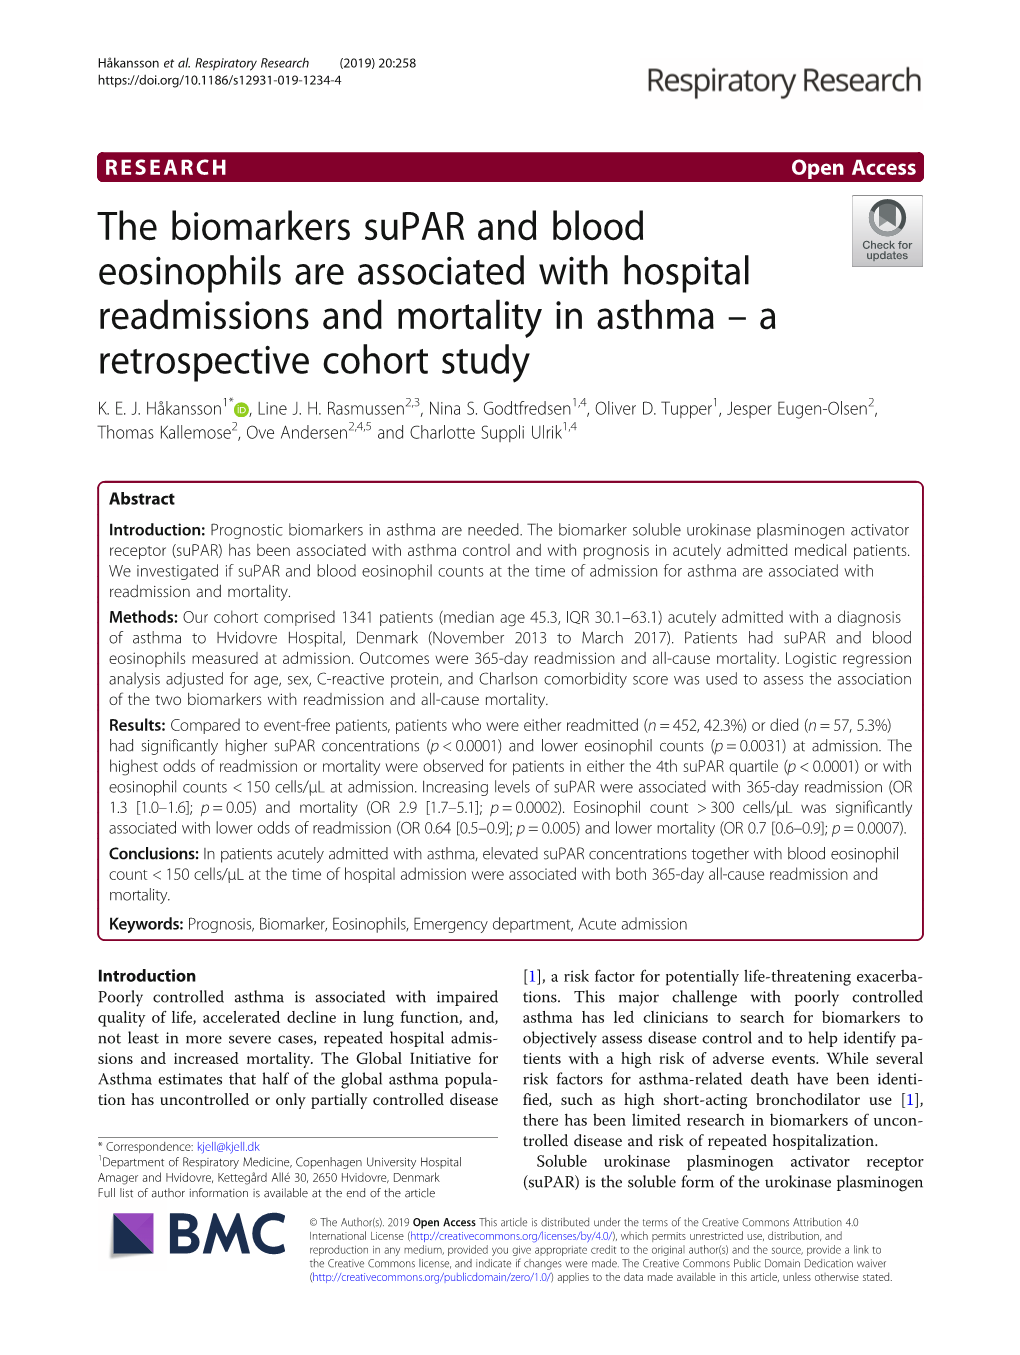 The Biomarkers Supar and Blood Eosinophils Are Associated with Hospital Readmissions and Mortality in Asthma – a Retrospective Cohort Study K